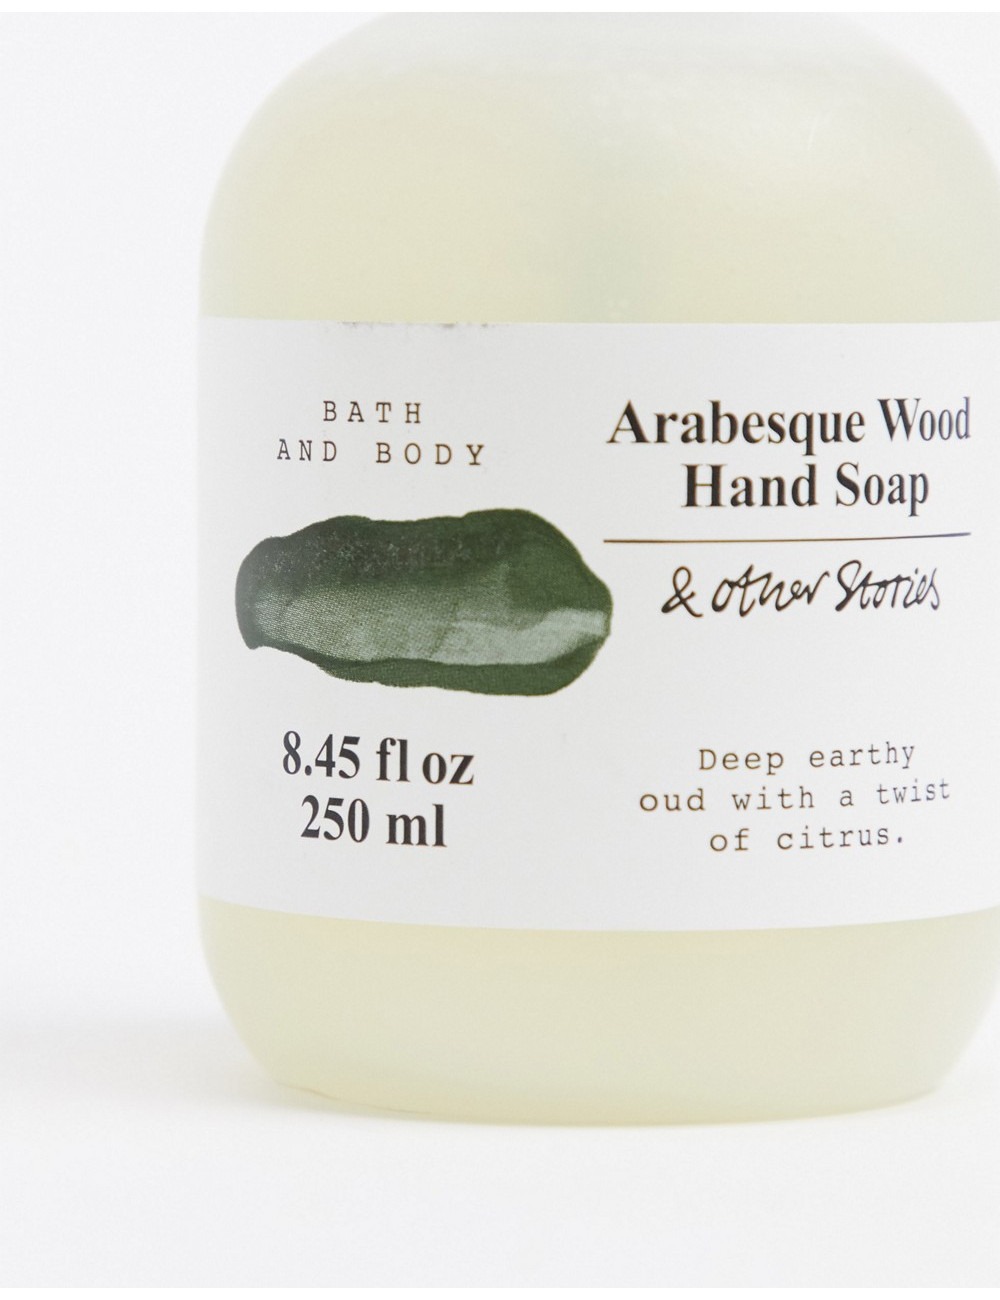 & Other Stories hand soap...